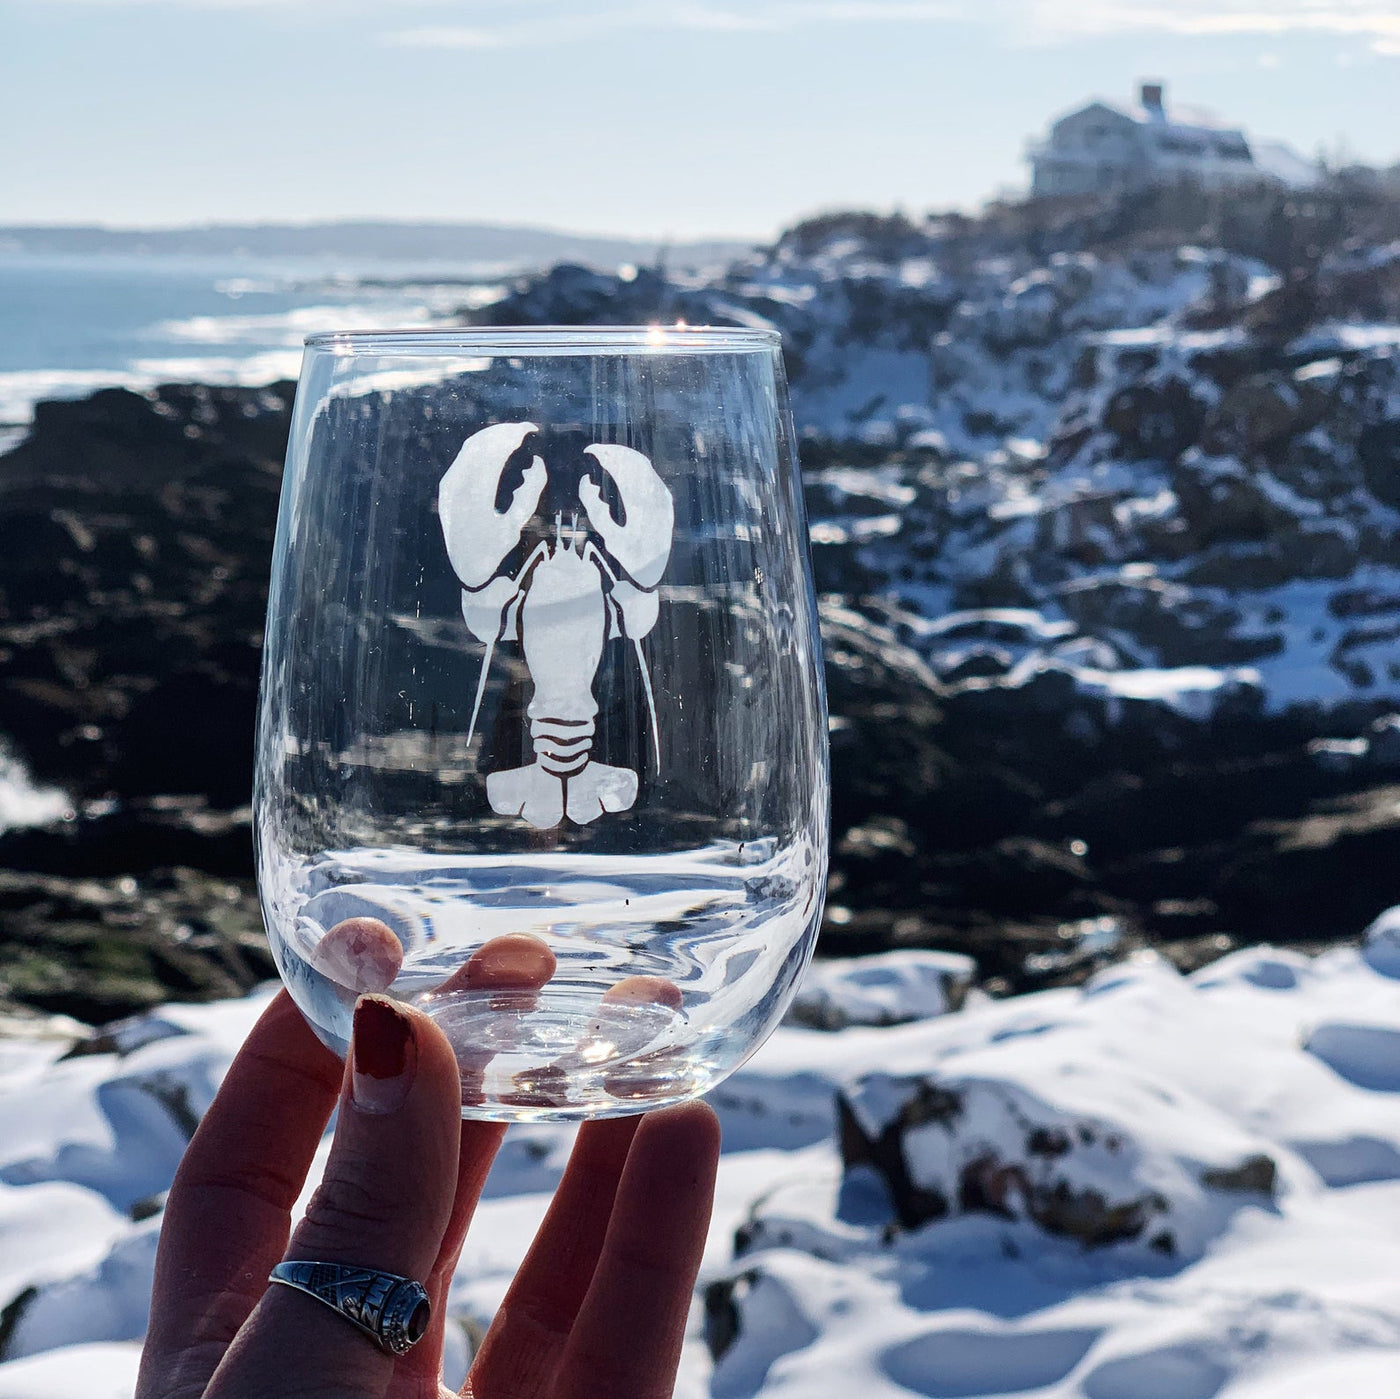 Maine Themed Etched Stemless Wine Glasses